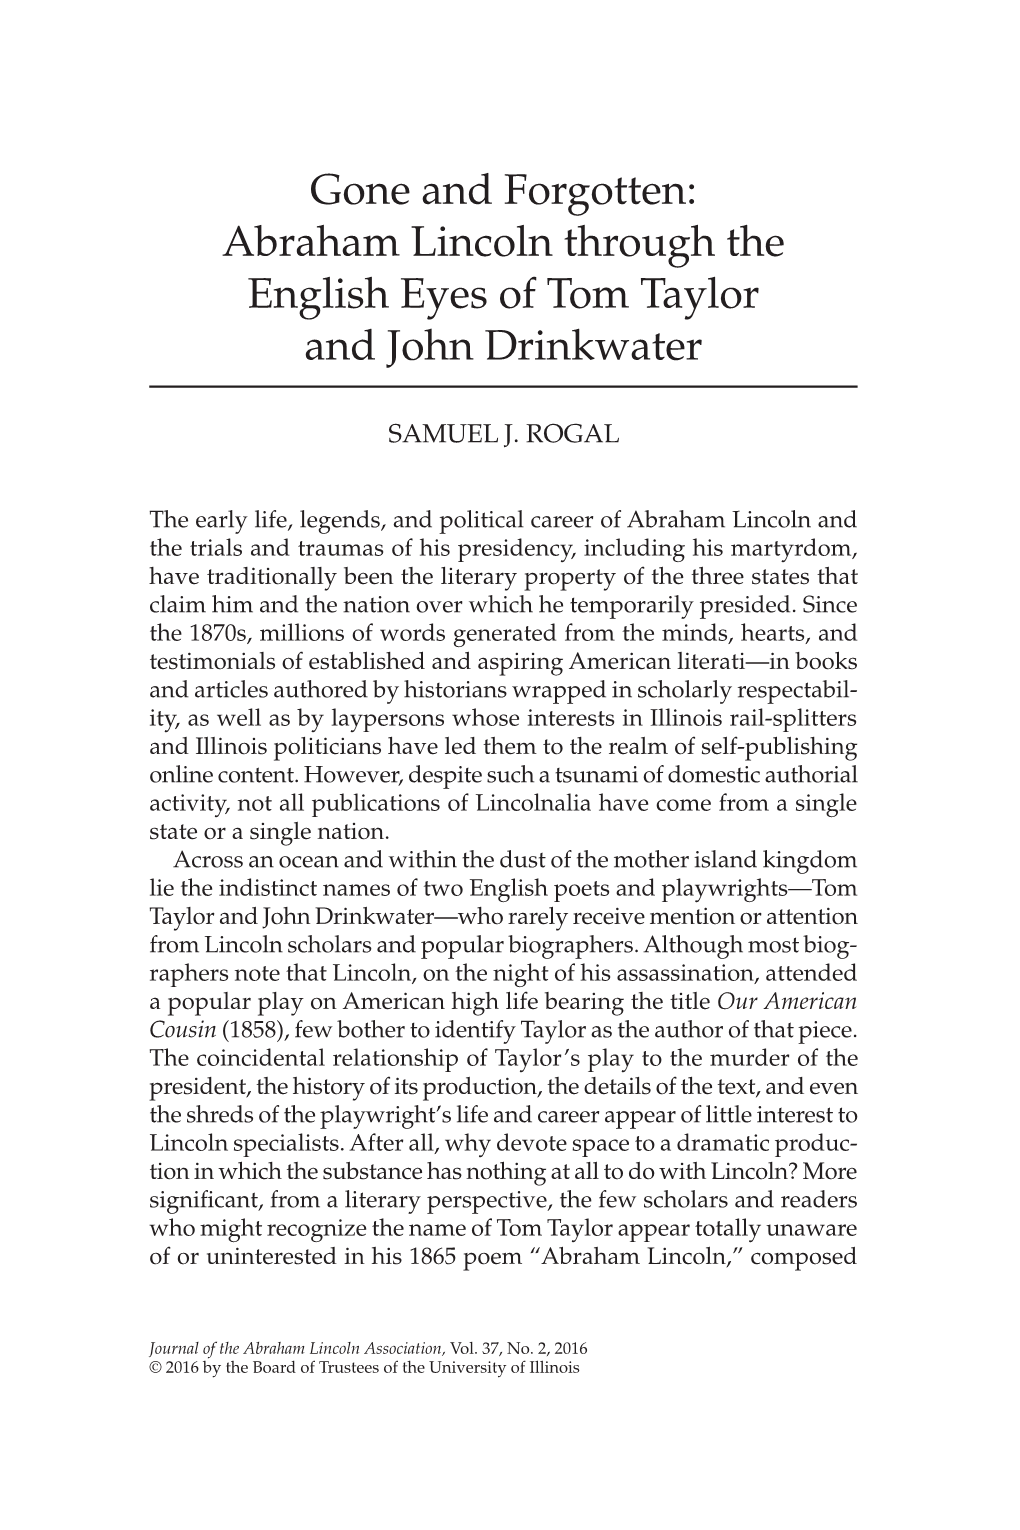 Gone and Forgotten: Abraham Lincoln Through the English Eyes of Tom Taylor and John Drinkwater